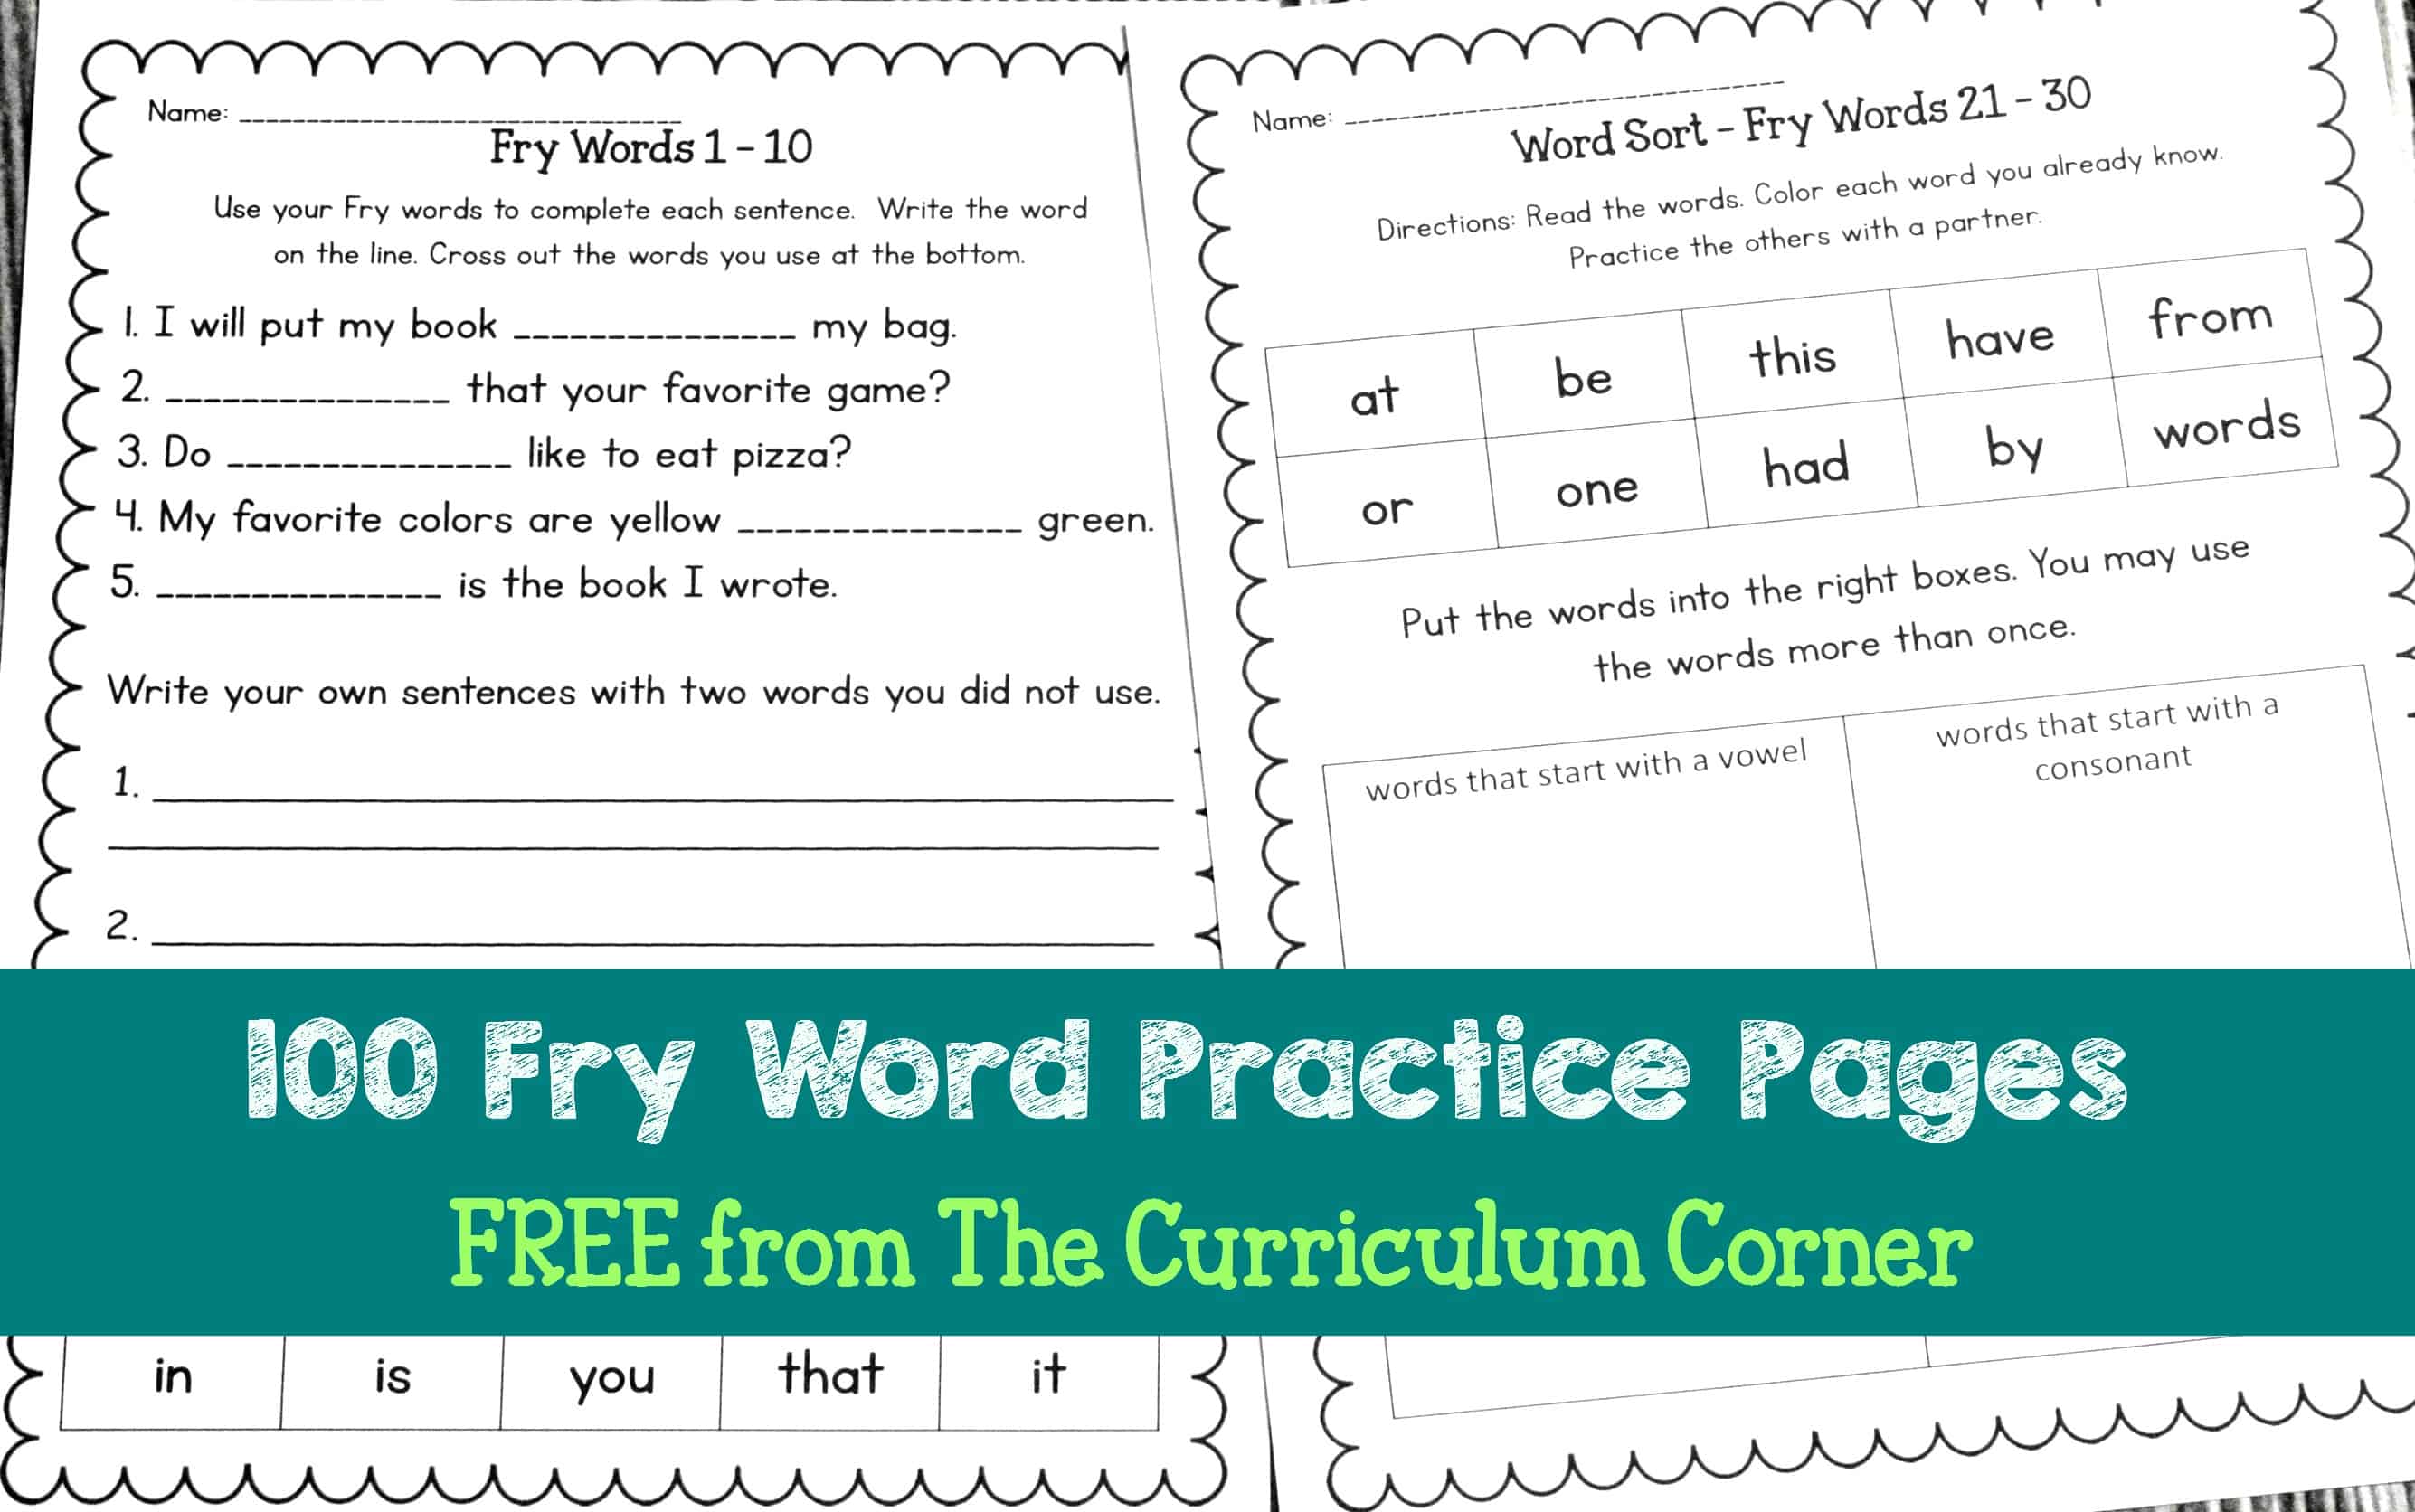 fry-word-practice-pages-the-curriculum-corner-123